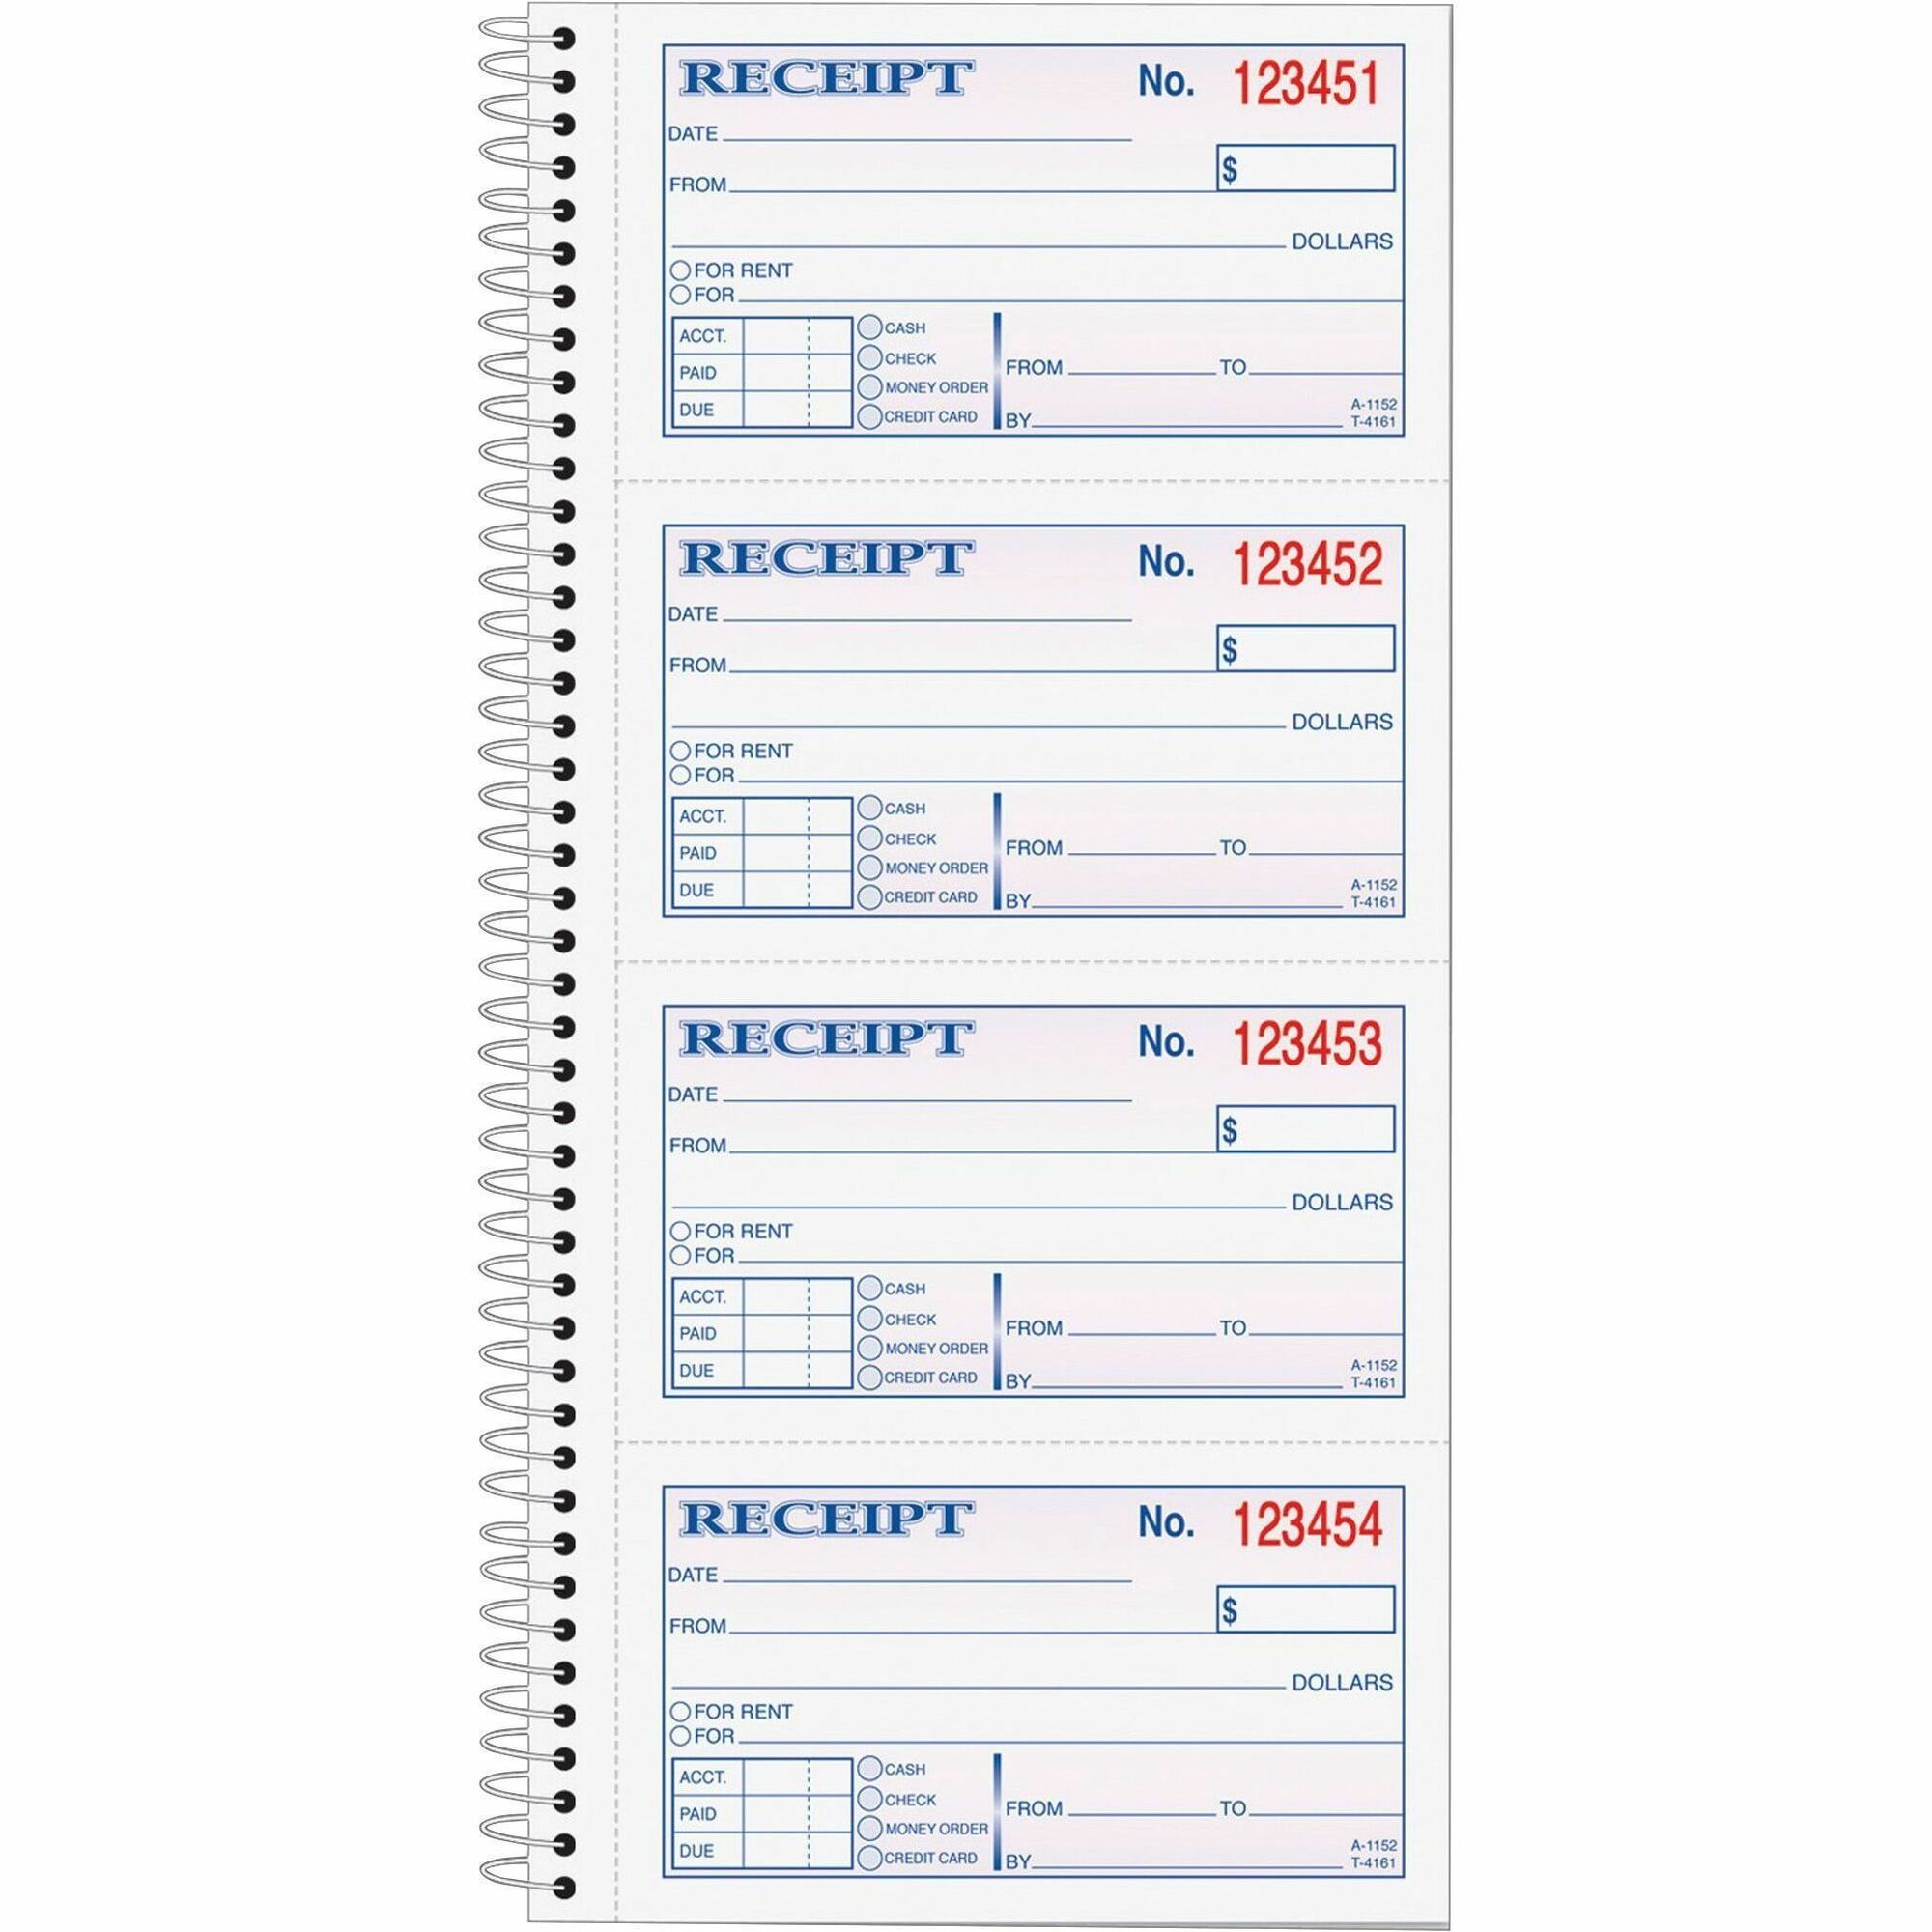 Tops Products Tops Carbonless 2-part Money Receipt Book - 200 Sheet(S) - Wire Bound - 2 Part - Carbonless Copy - 5 1/2 X 11 Sheet Size - Blue, Red Print Color - 1 / Each